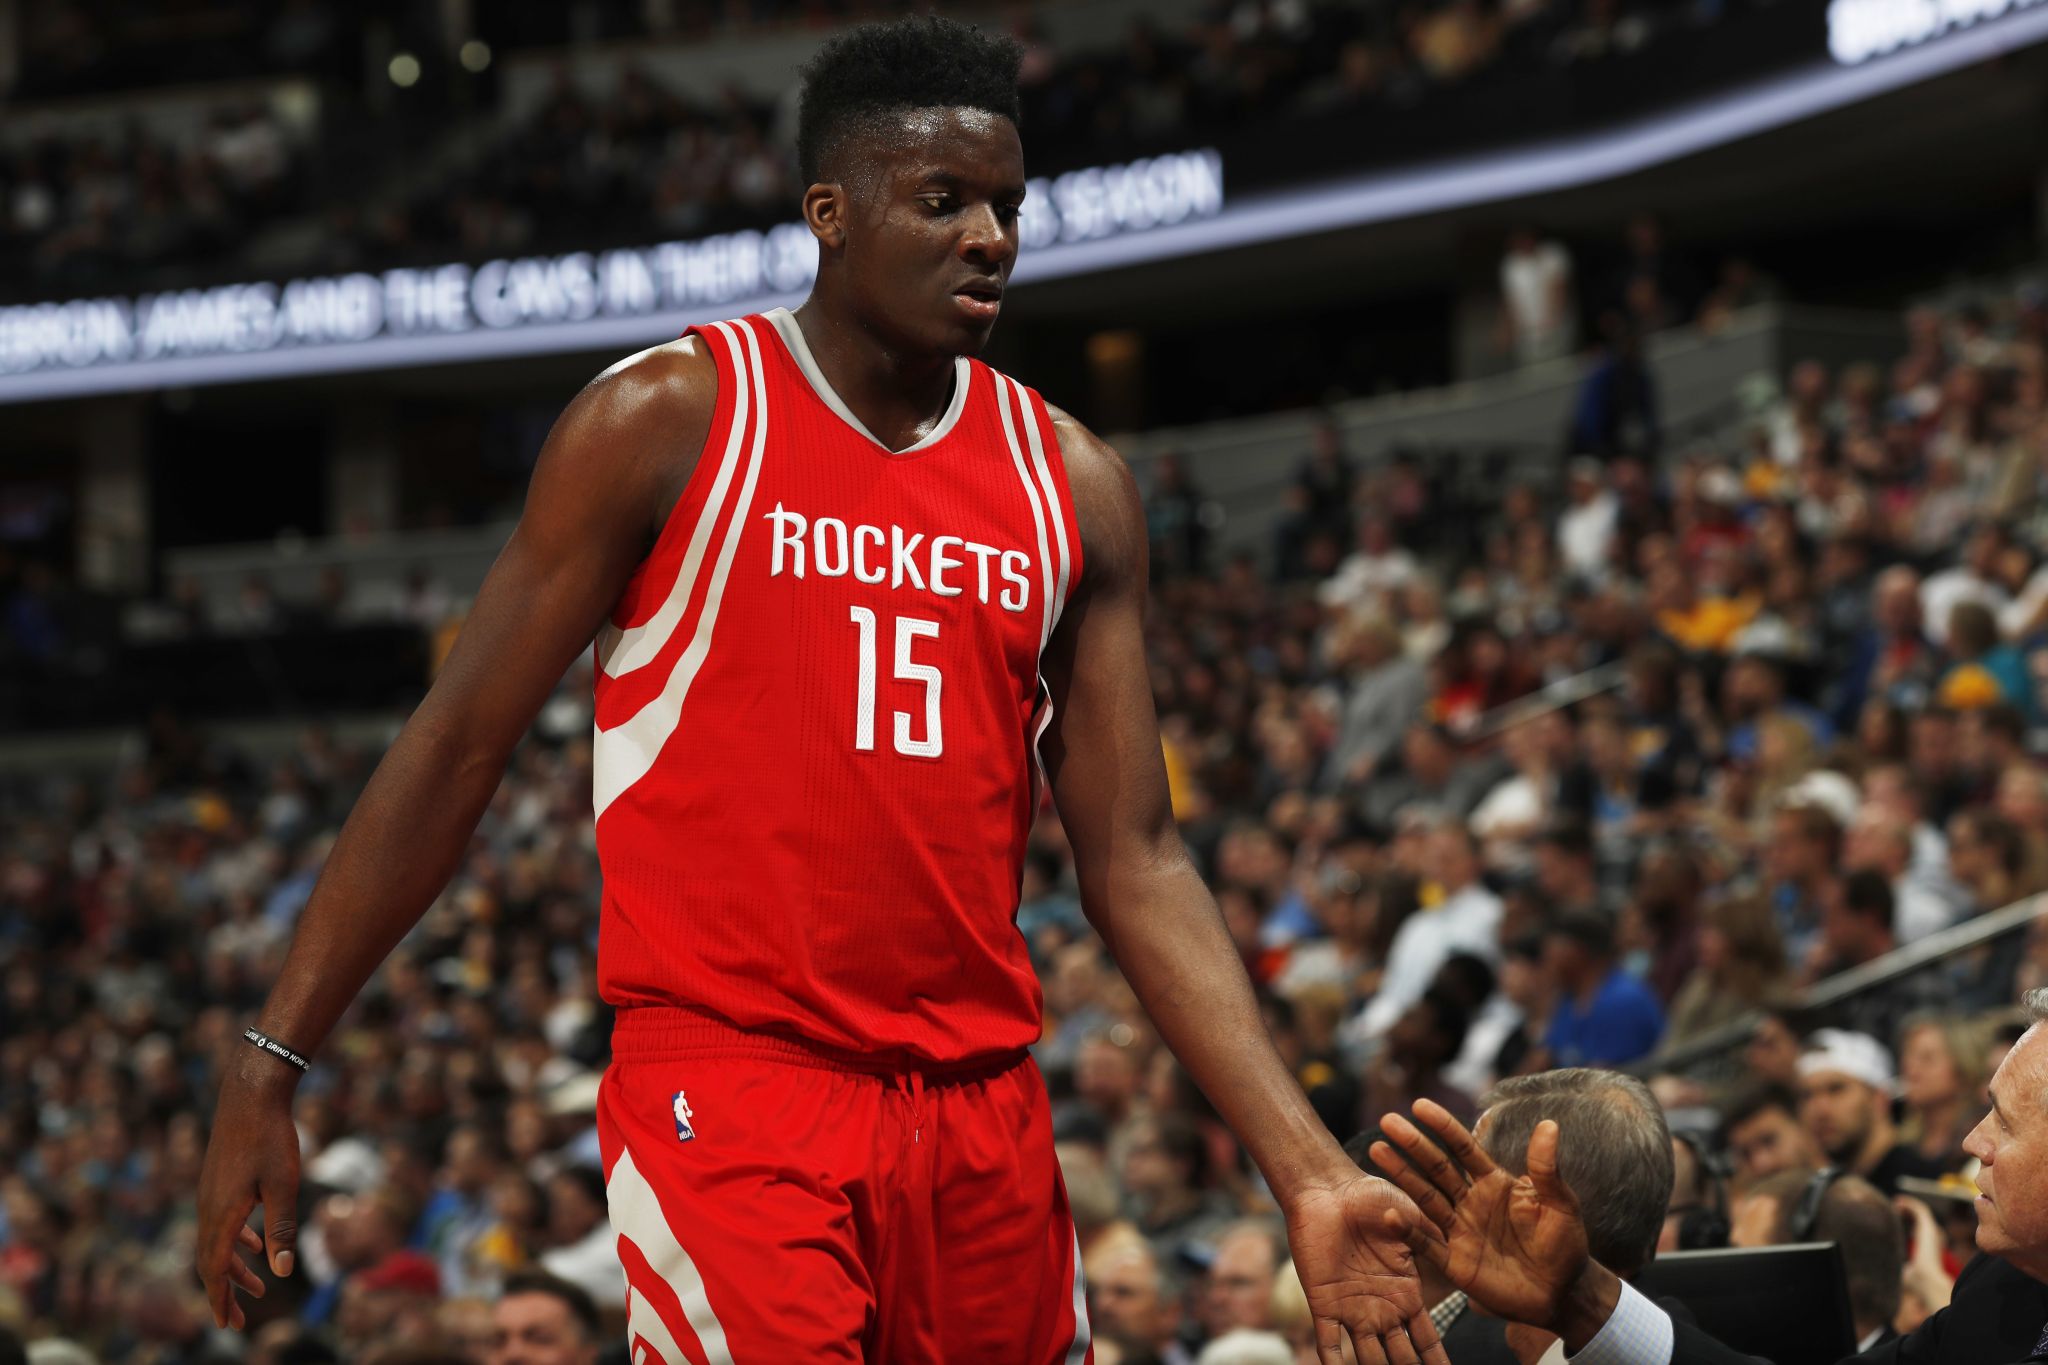 Rockets roll with Clint Capela as starter vs. Trail Blazers - Houston Chronicle